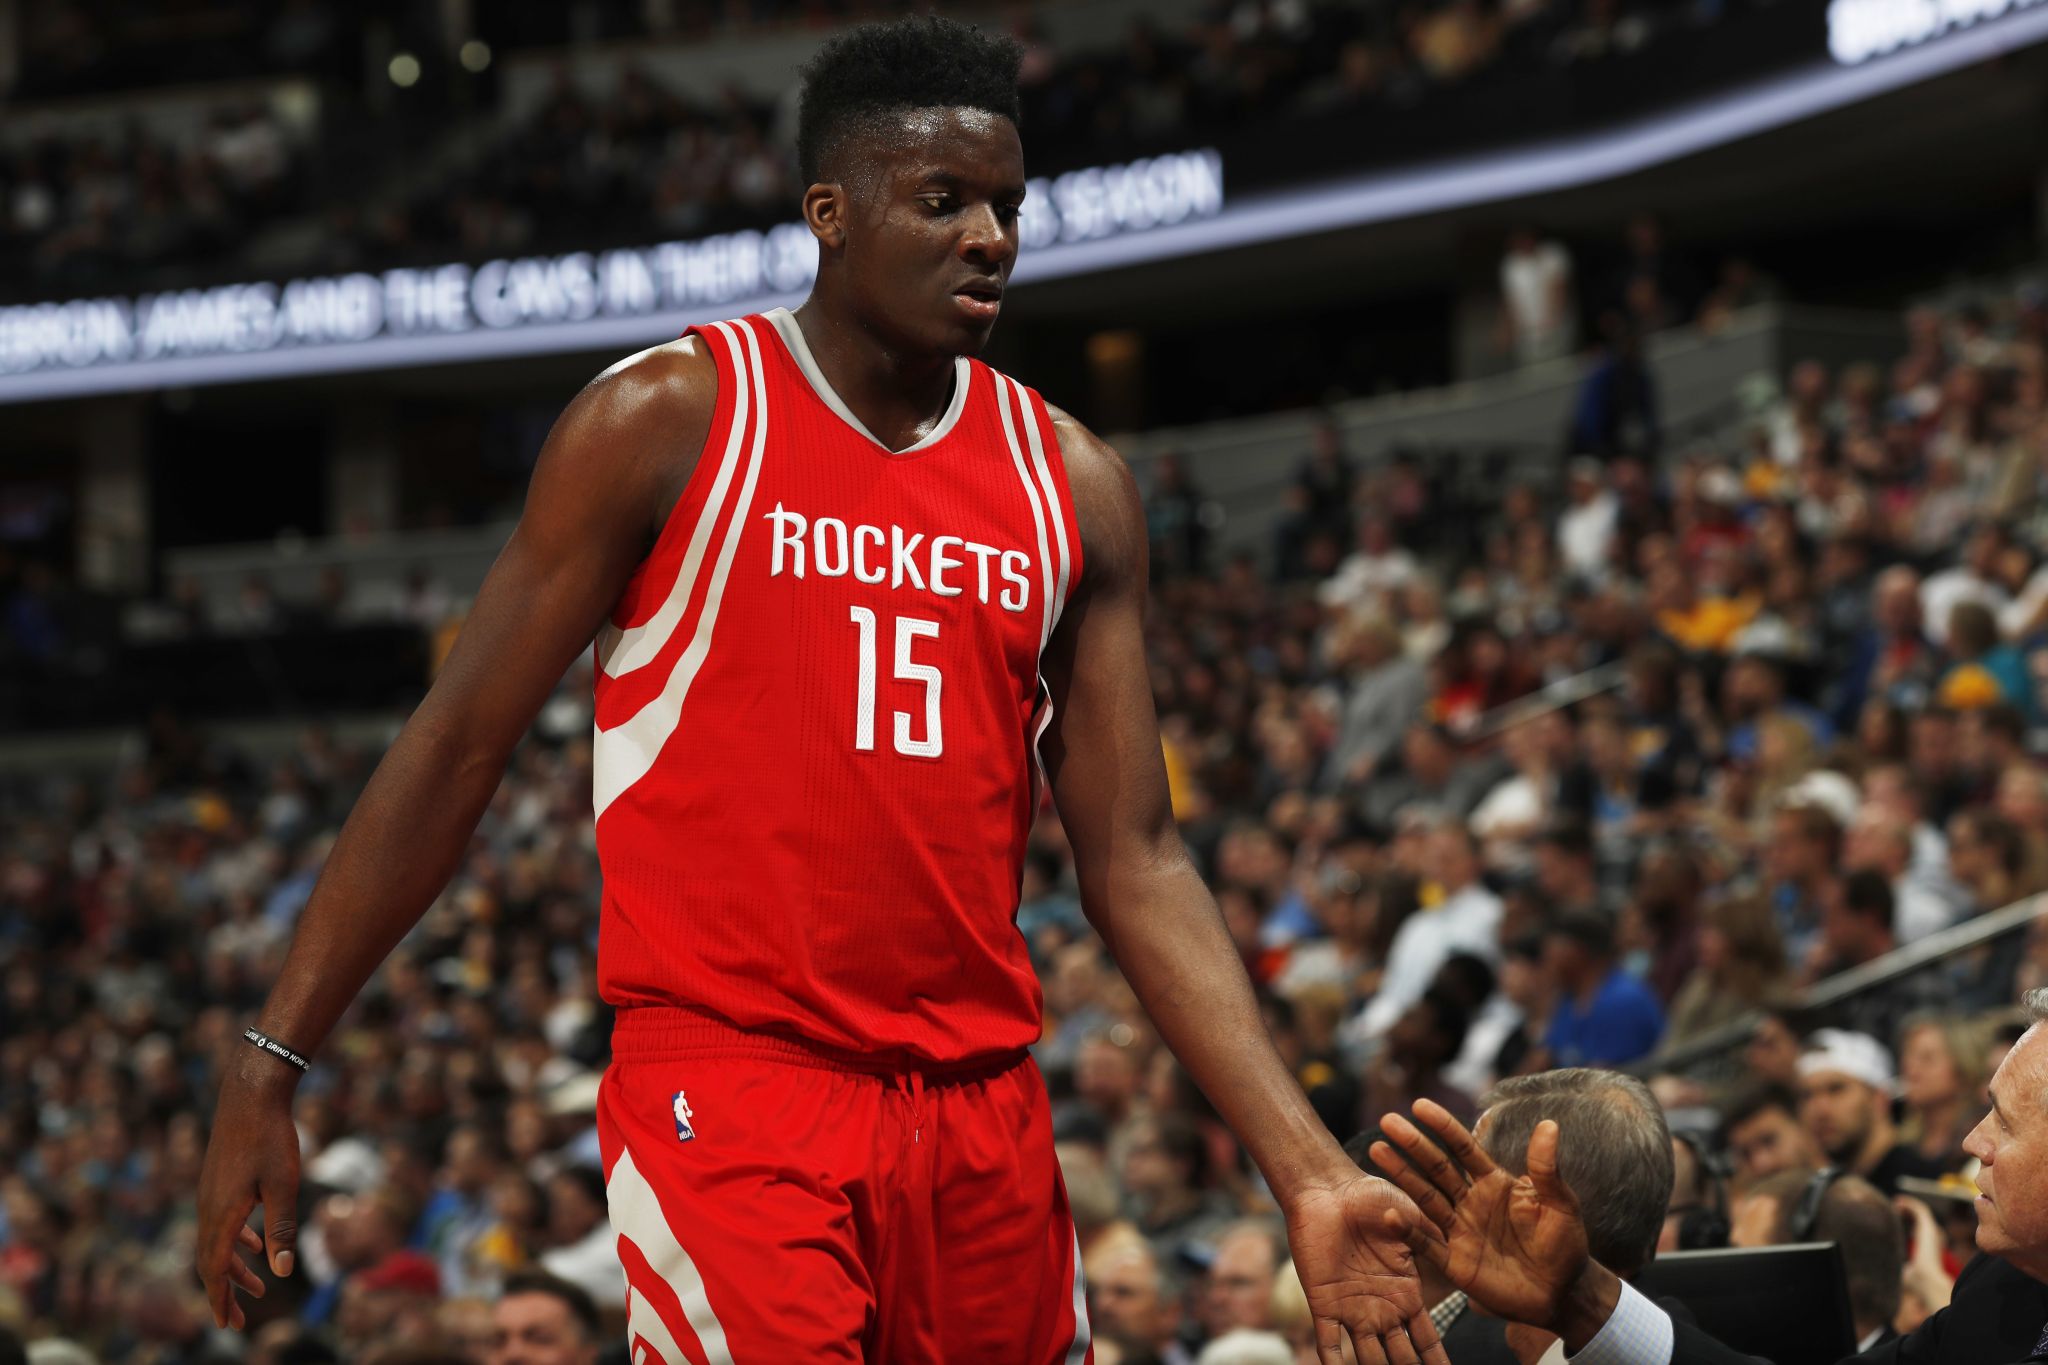 Rockets roll with Clint Capela as starter vs. Trail Blazers - Houston Chronicle